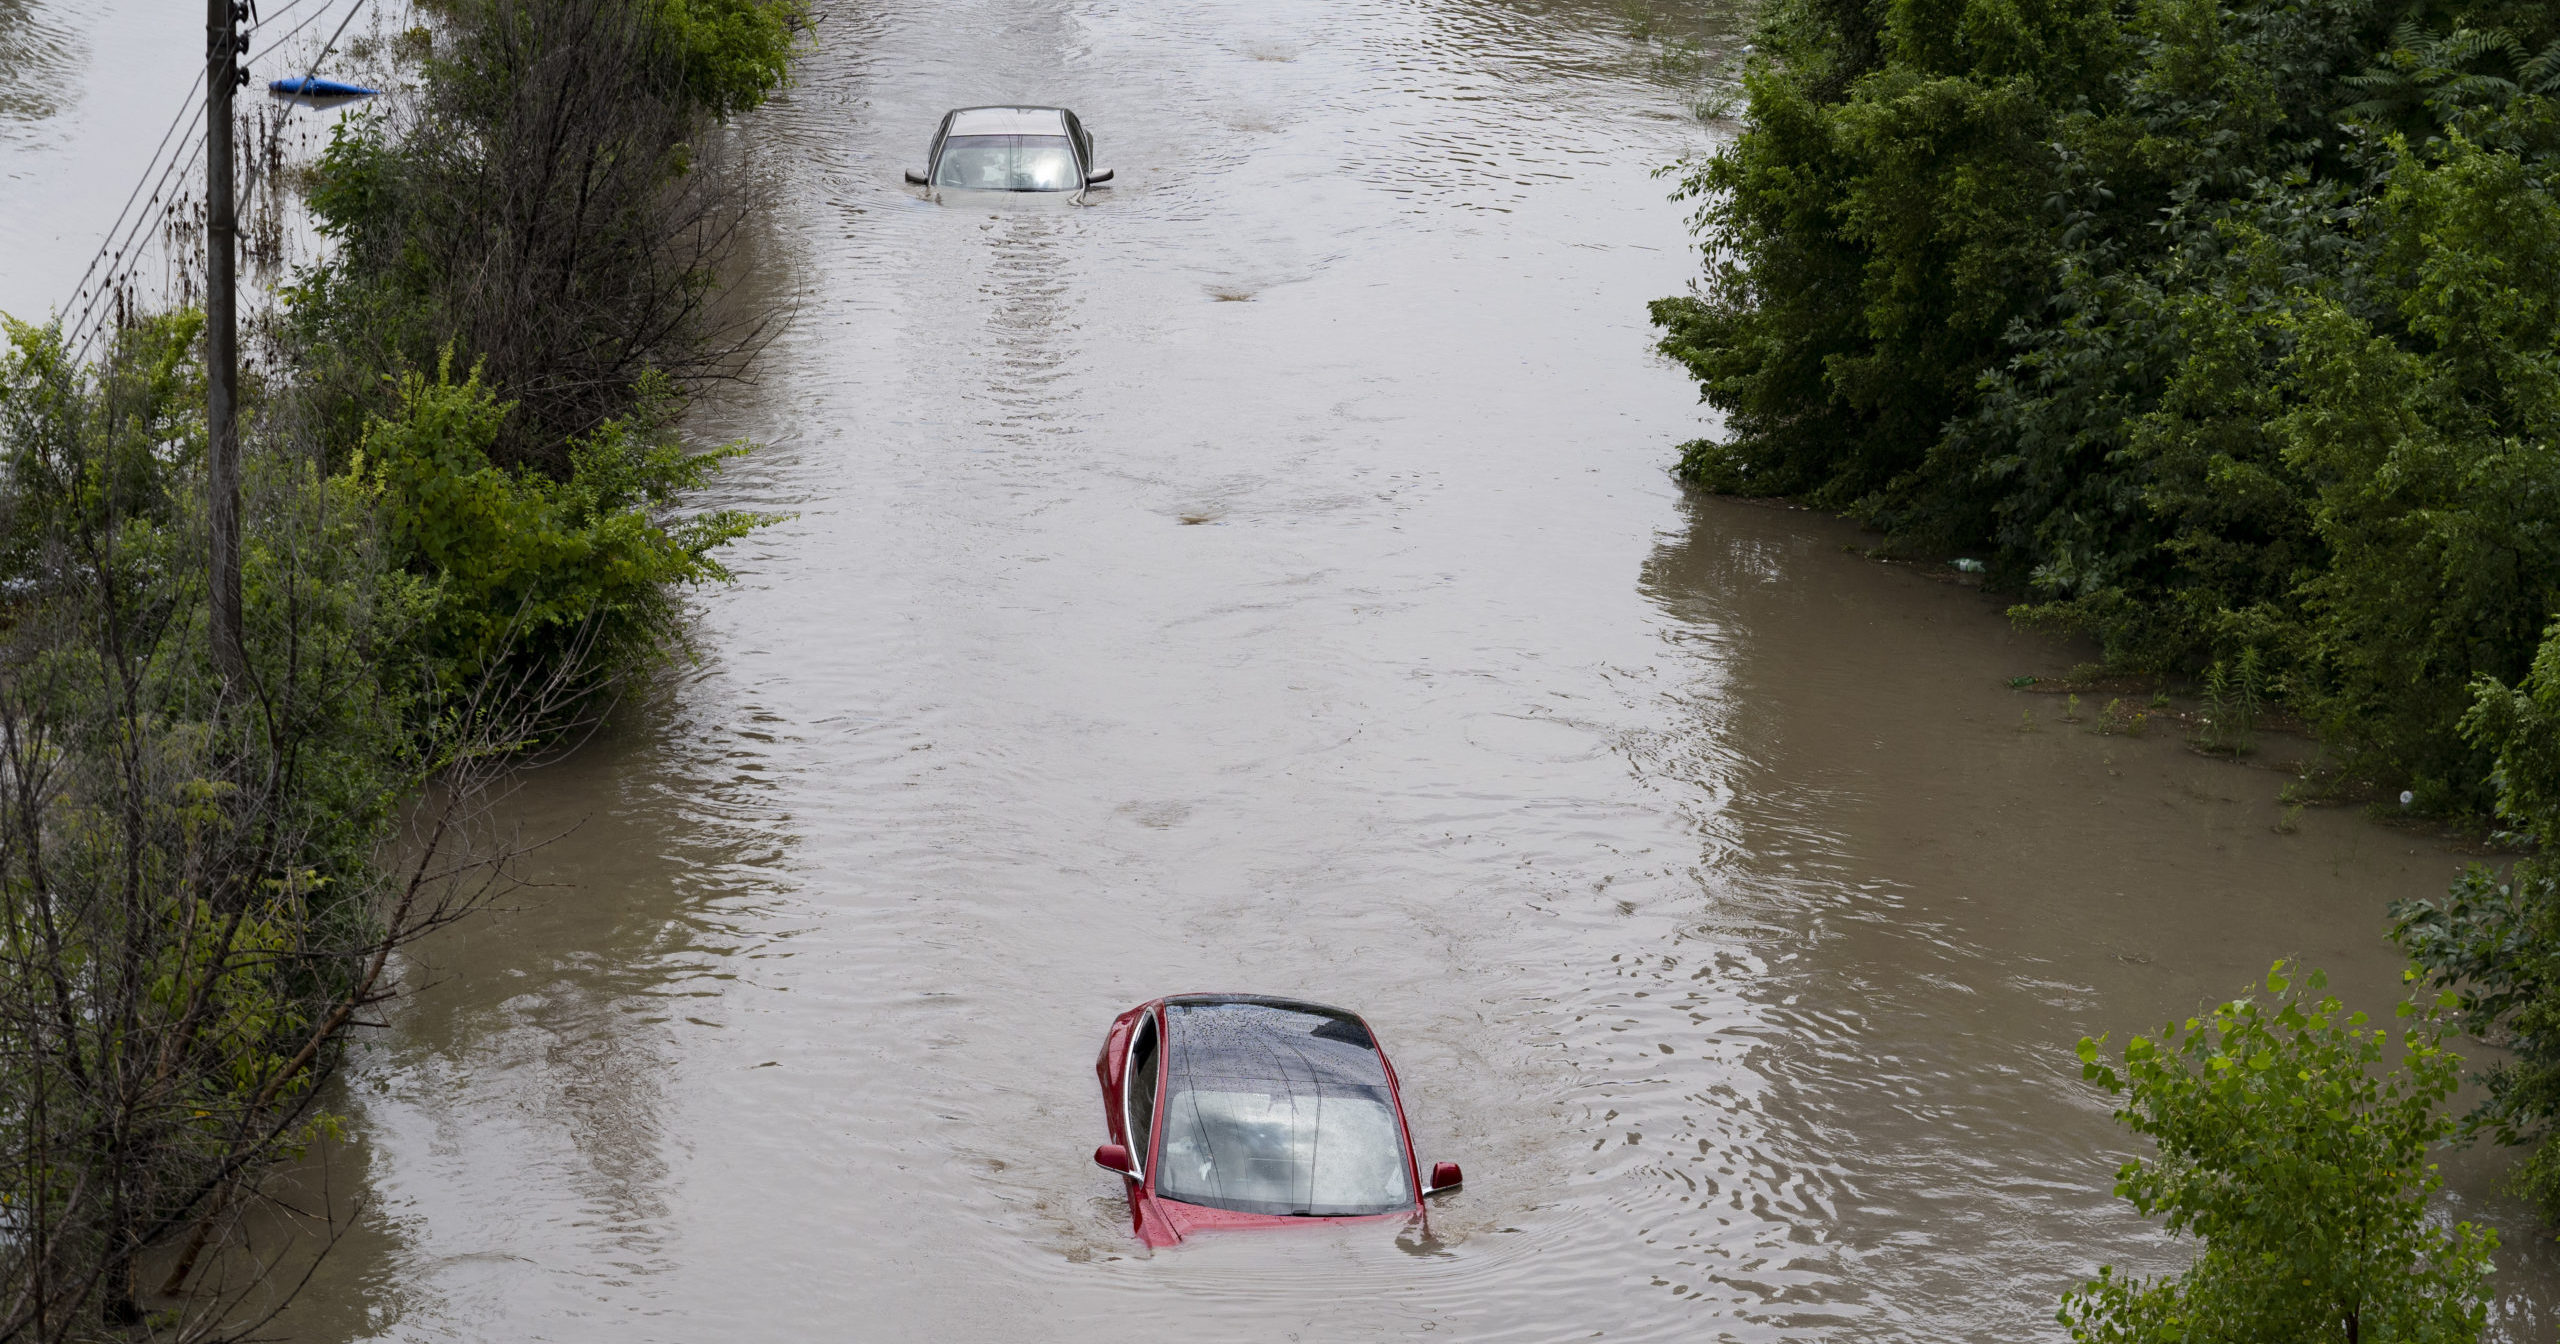 Cars are partially submerged in floodwaters in the Don Valley following heavy rain in Toronto on Tuesday.